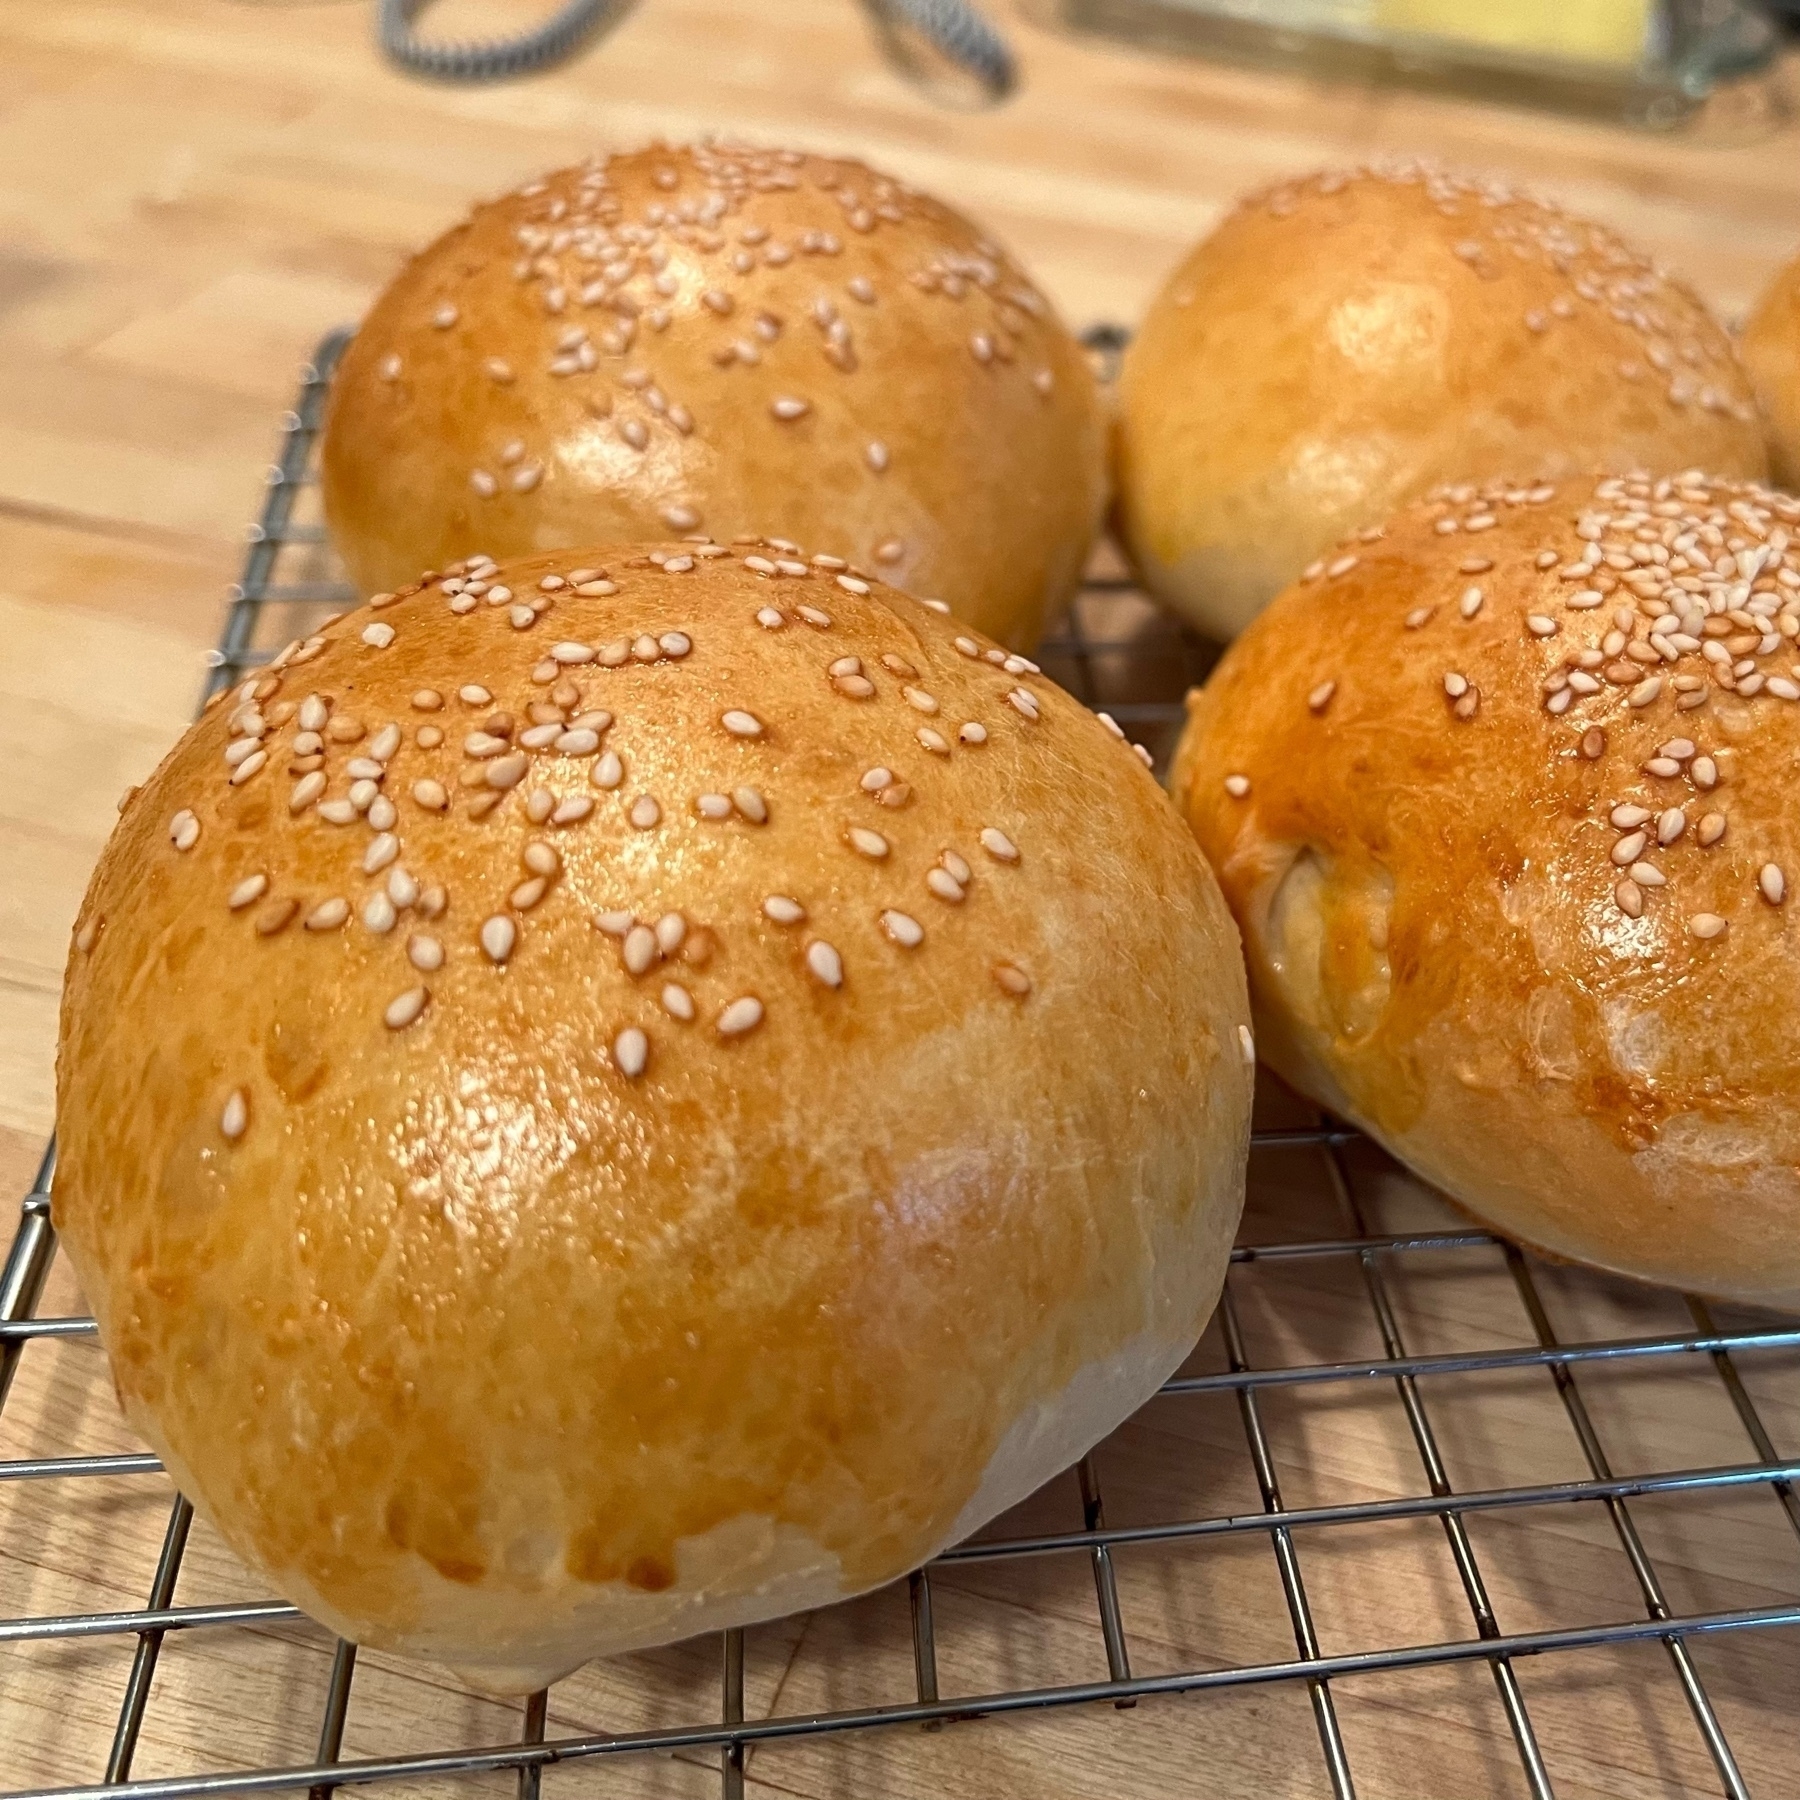 fresh baked, well-risen hamburger buns with a shine from egg wash, and sesame seeds.